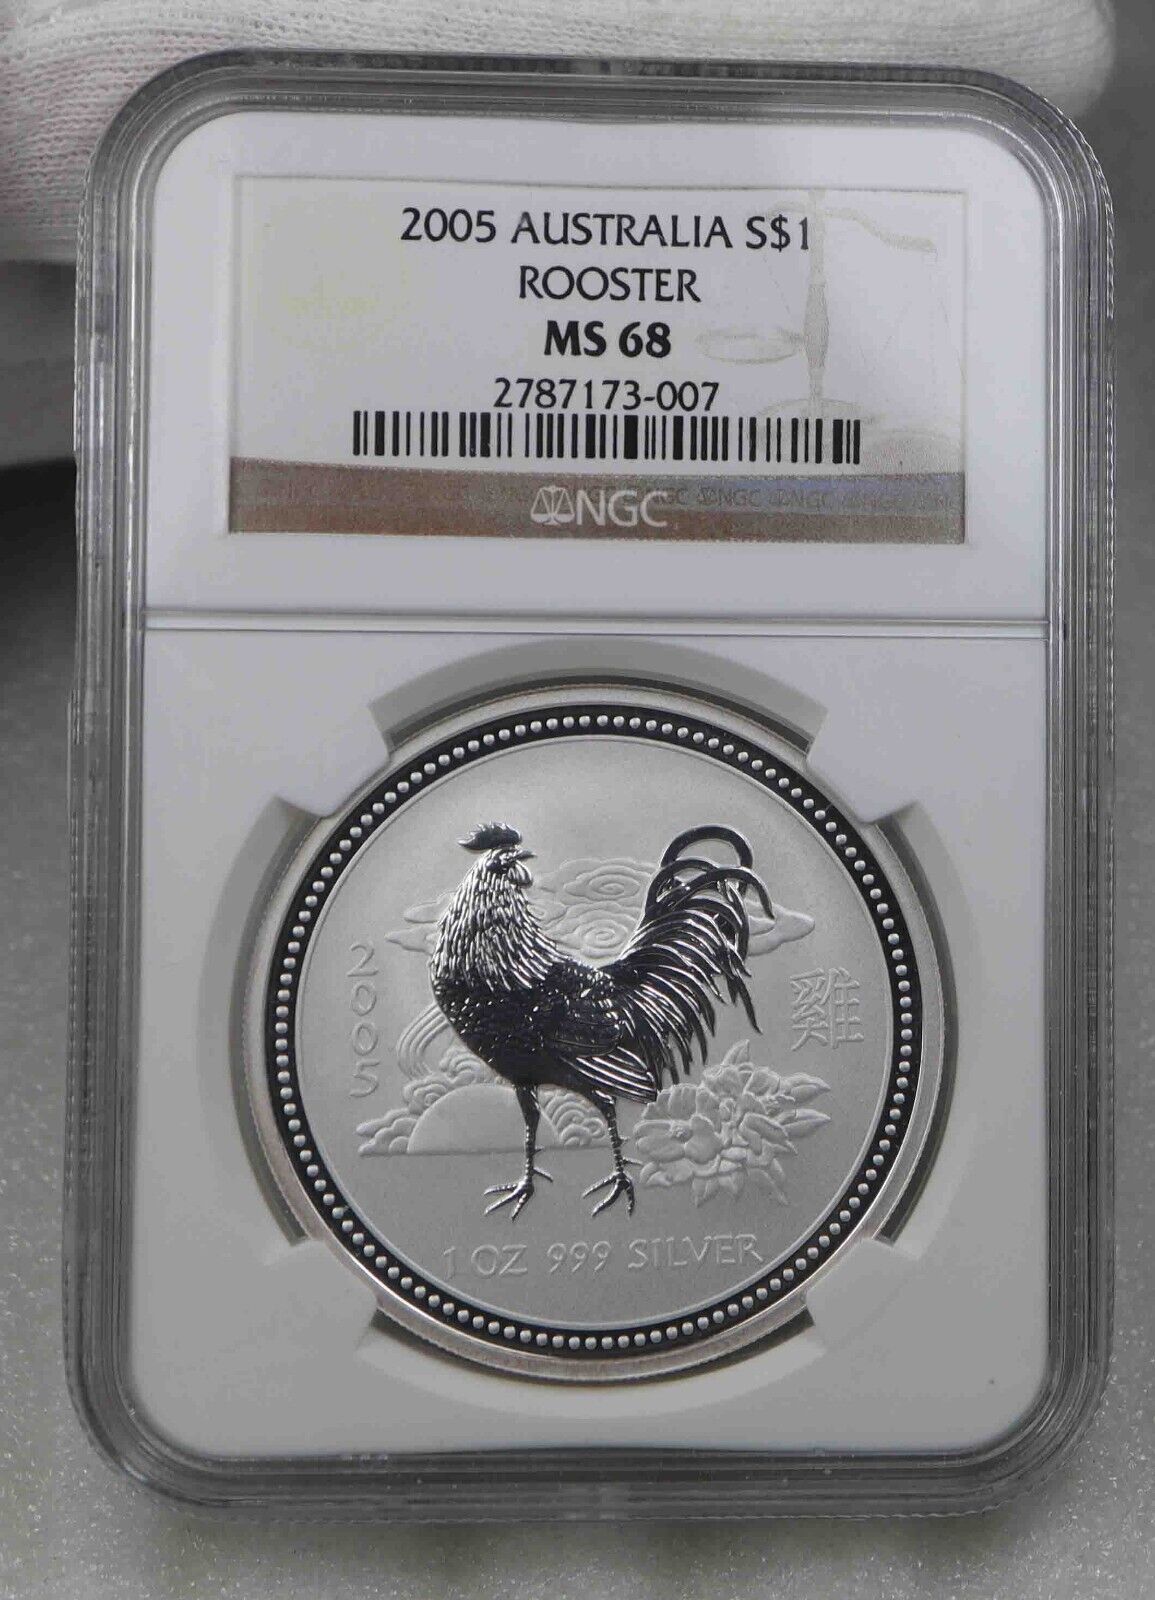 Australia $1 Lunar Rooster 2005 NGC MS68 1 Oz 999 Silver coin [1315